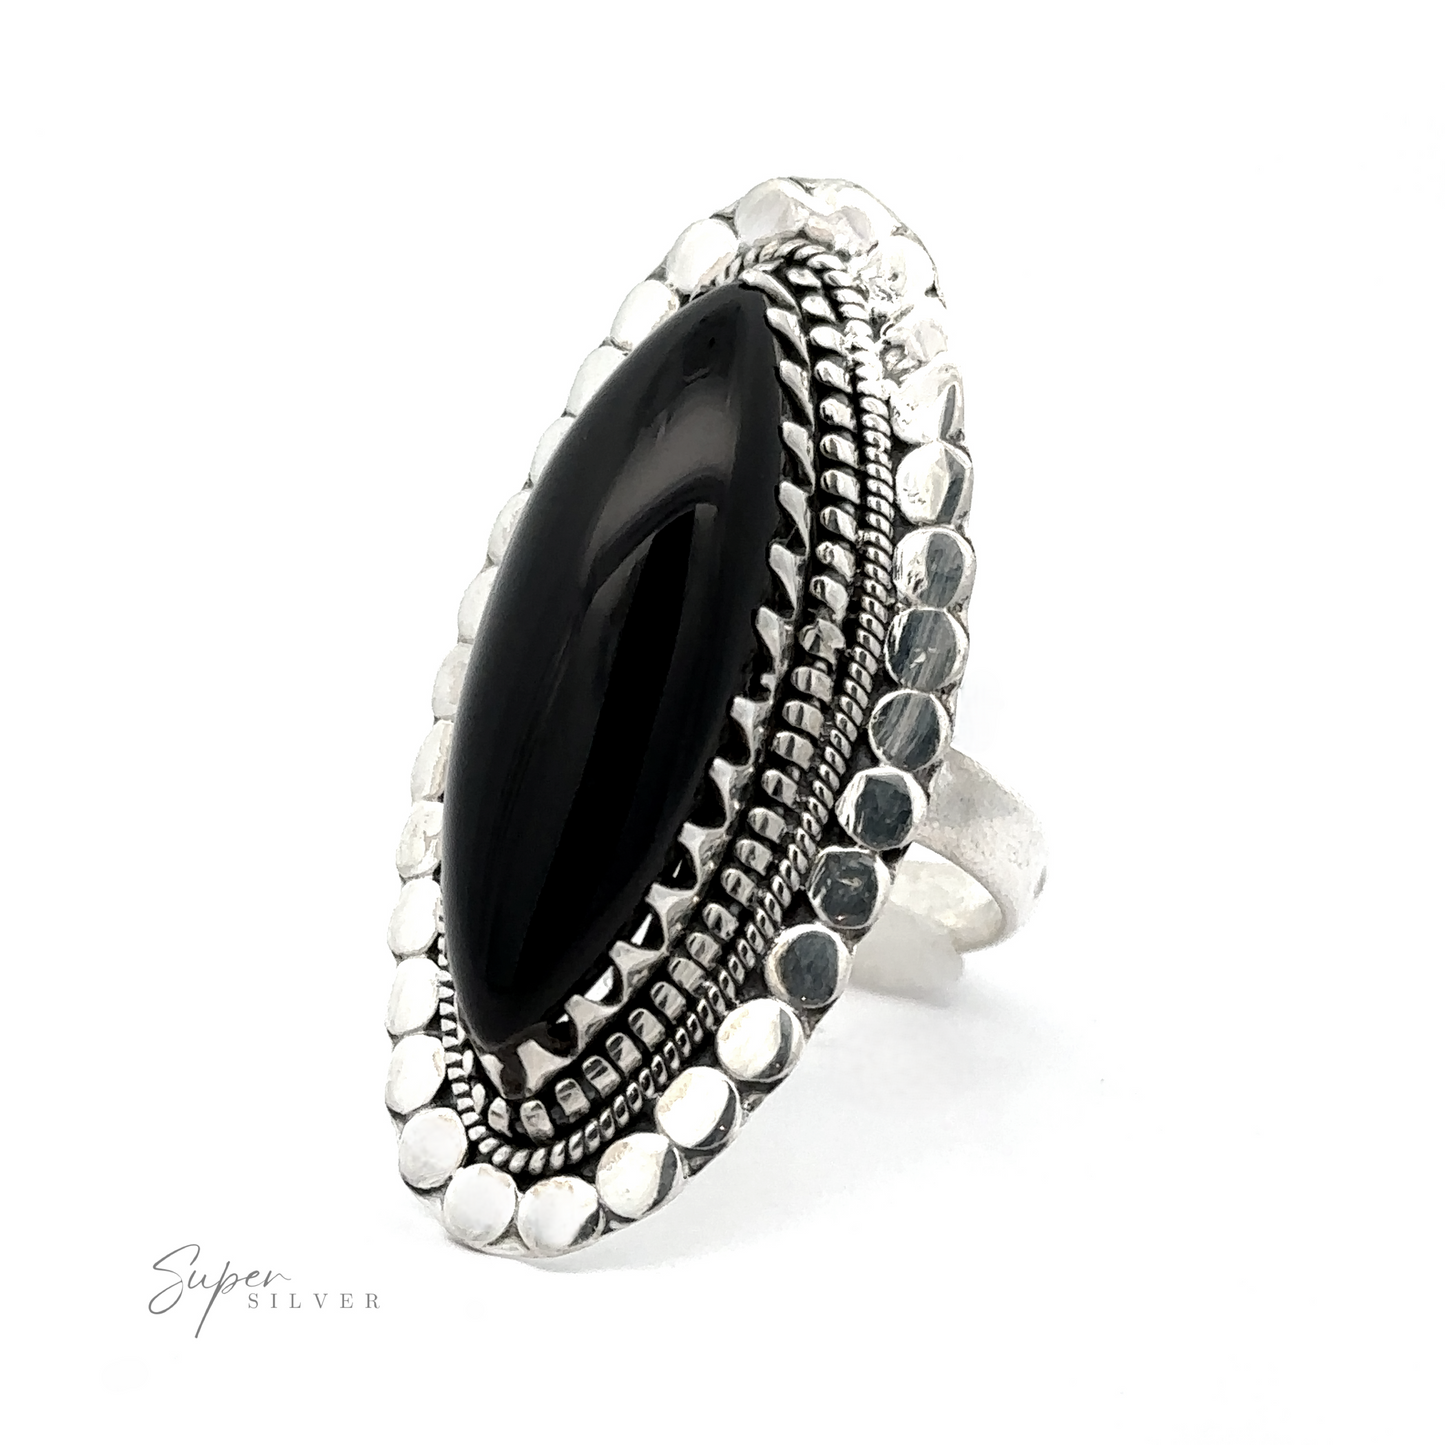 
                  
                    A silver ring with a large marquise-shaped gemstone set in the center, surrounded by a detailed, textured silver border design. The "Statement Marquise Shaped Gemstone Ring" logo is at the bottom left corner, embodying the essence of bohemian jewelry elegance.
                  
                